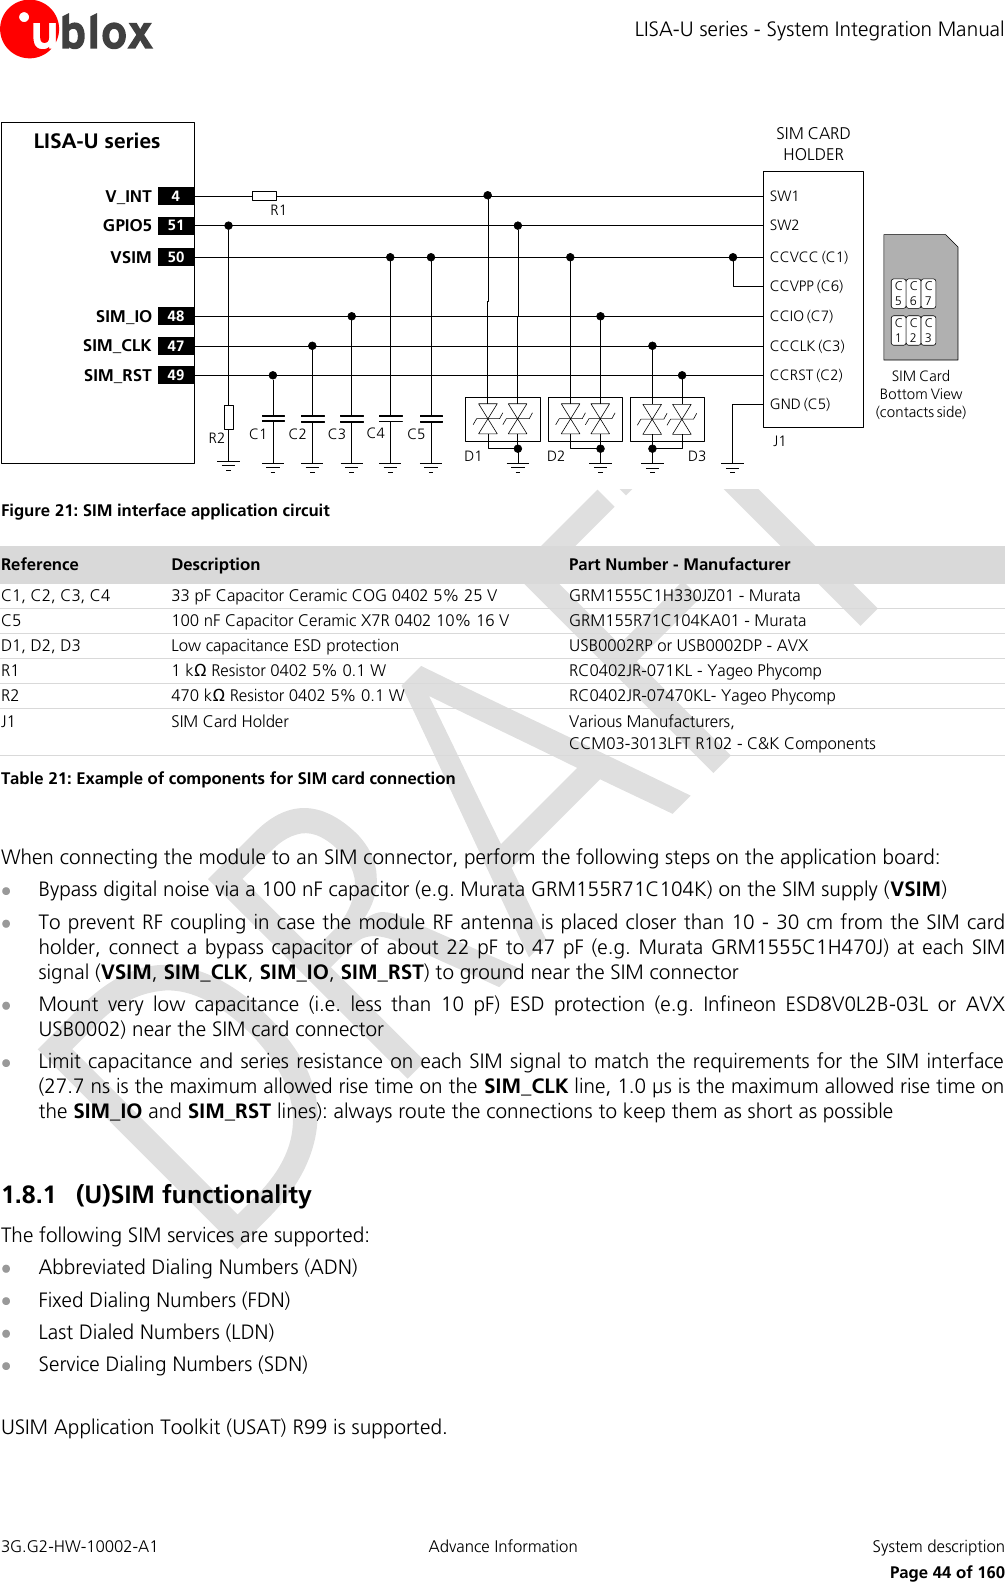 LISA-U series - System Integration Manual 3G.G2-HW-10002-A1  Advance Information  System description      Page 44 of 160 LISA-U seriesC1SIM CARD HOLDERCCVCC (C1)CCVPP (C6)CCIO (C7)CCCLK (C3)CCRST (C2)GND (C5)C2 C3 C5D2 D3C5C6C7C1C2C3SIM Card Bottom View (contacts side)J150VSIM48SIM_IO47SIM_CLK49SIM_RSTC4SW1SW24V_INT51GPIO5R2R1D1 Figure 21: SIM interface application circuit Reference Description Part Number - Manufacturer C1, C2, C3, C4 33 pF Capacitor Ceramic COG 0402 5% 25 V GRM1555C1H330JZ01 - Murata C5 100 nF Capacitor Ceramic X7R 0402 10% 16 V GRM155R71C104KA01 - Murata D1, D2, D3 Low capacitance ESD protection USB0002RP or USB0002DP - AVX R1 1 kΩ Resistor 0402 5% 0.1 W RC0402JR-071KL - Yageo Phycomp R2 470 kΩ Resistor 0402 5% 0.1 W RC0402JR-07470KL- Yageo Phycomp J1 SIM Card Holder Various Manufacturers, CCM03-3013LFT R102 - C&amp;K Components Table 21: Example of components for SIM card connection  When connecting the module to an SIM connector, perform the following steps on the application board:  Bypass digital noise via a 100 nF capacitor (e.g. Murata GRM155R71C104K) on the SIM supply (VSIM)  To prevent RF coupling in case the module RF antenna is placed closer than 10 - 30 cm from the SIM card holder, connect a bypass capacitor of about 22 pF to 47 pF (e.g. Murata GRM1555C1H470J) at each SIM signal (VSIM, SIM_CLK, SIM_IO, SIM_RST) to ground near the SIM connector  Mount  very  low  capacitance  (i.e.  less  than  10  pF)  ESD  protection  (e.g.  Infineon  ESD8V0L2B-03L  or  AVX USB0002) near the SIM card connector  Limit capacitance and series resistance on each SIM signal to match the requirements for the SIM interface (27.7 ns is the maximum allowed rise time on the SIM_CLK line, 1.0 µs is the maximum allowed rise time on the SIM_IO and SIM_RST lines): always route the connections to keep them as short as possible  1.8.1 (U)SIM functionality The following SIM services are supported:  Abbreviated Dialing Numbers (ADN)  Fixed Dialing Numbers (FDN)  Last Dialed Numbers (LDN)  Service Dialing Numbers (SDN)  USIM Application Toolkit (USAT) R99 is supported. 